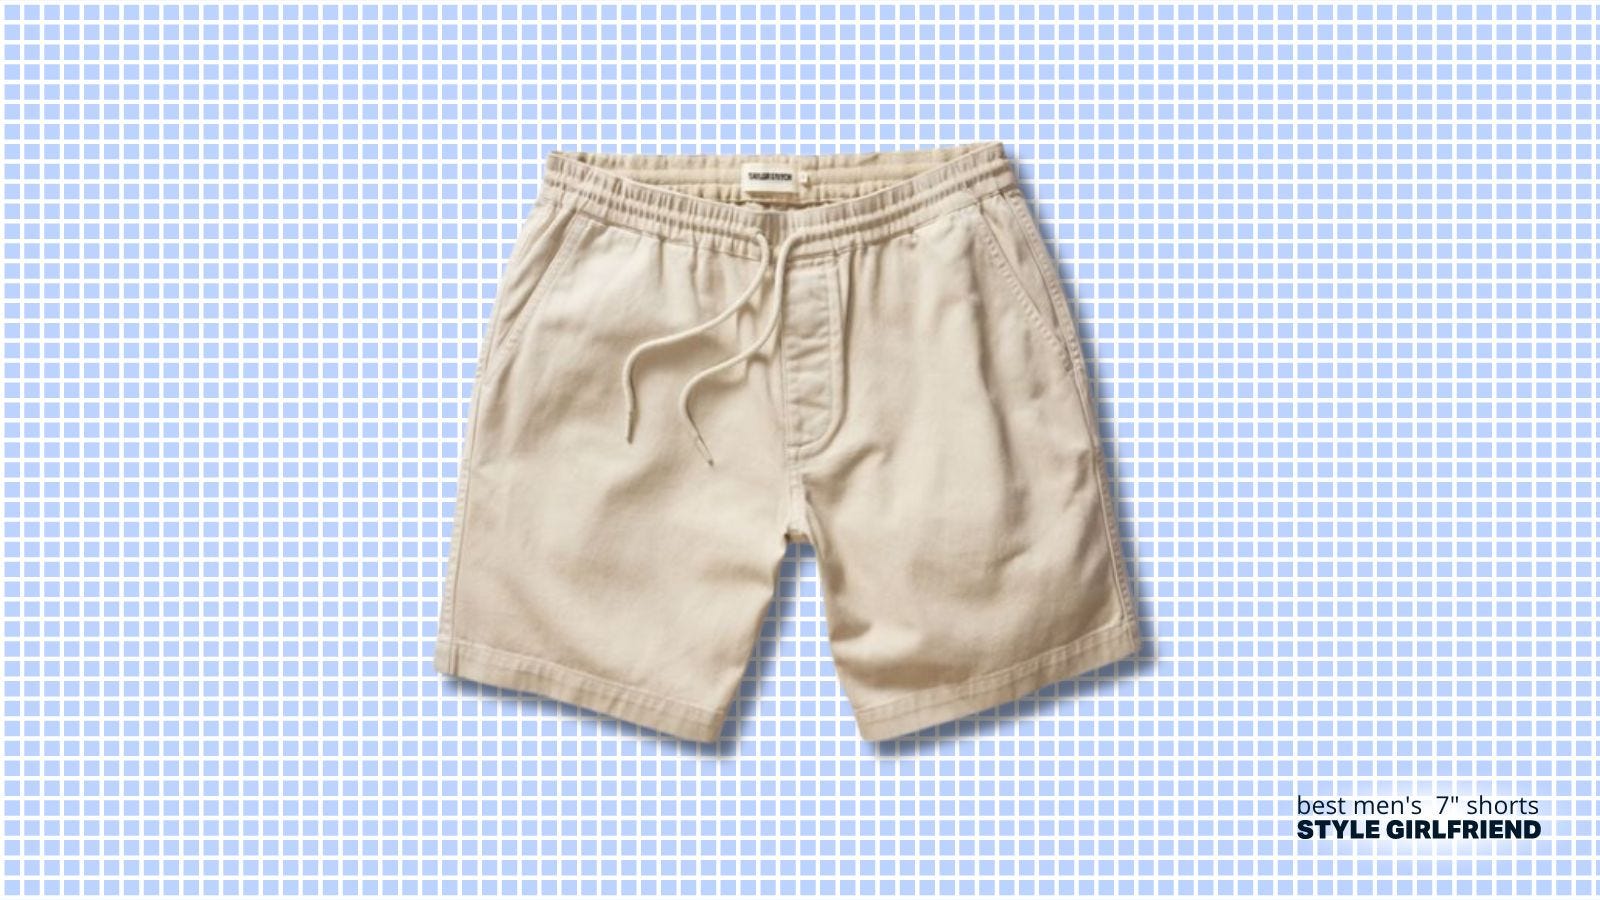 pair of off-white drawstring shorts set against a blue check background. text on-screen reads: best men's 7-inch shorts